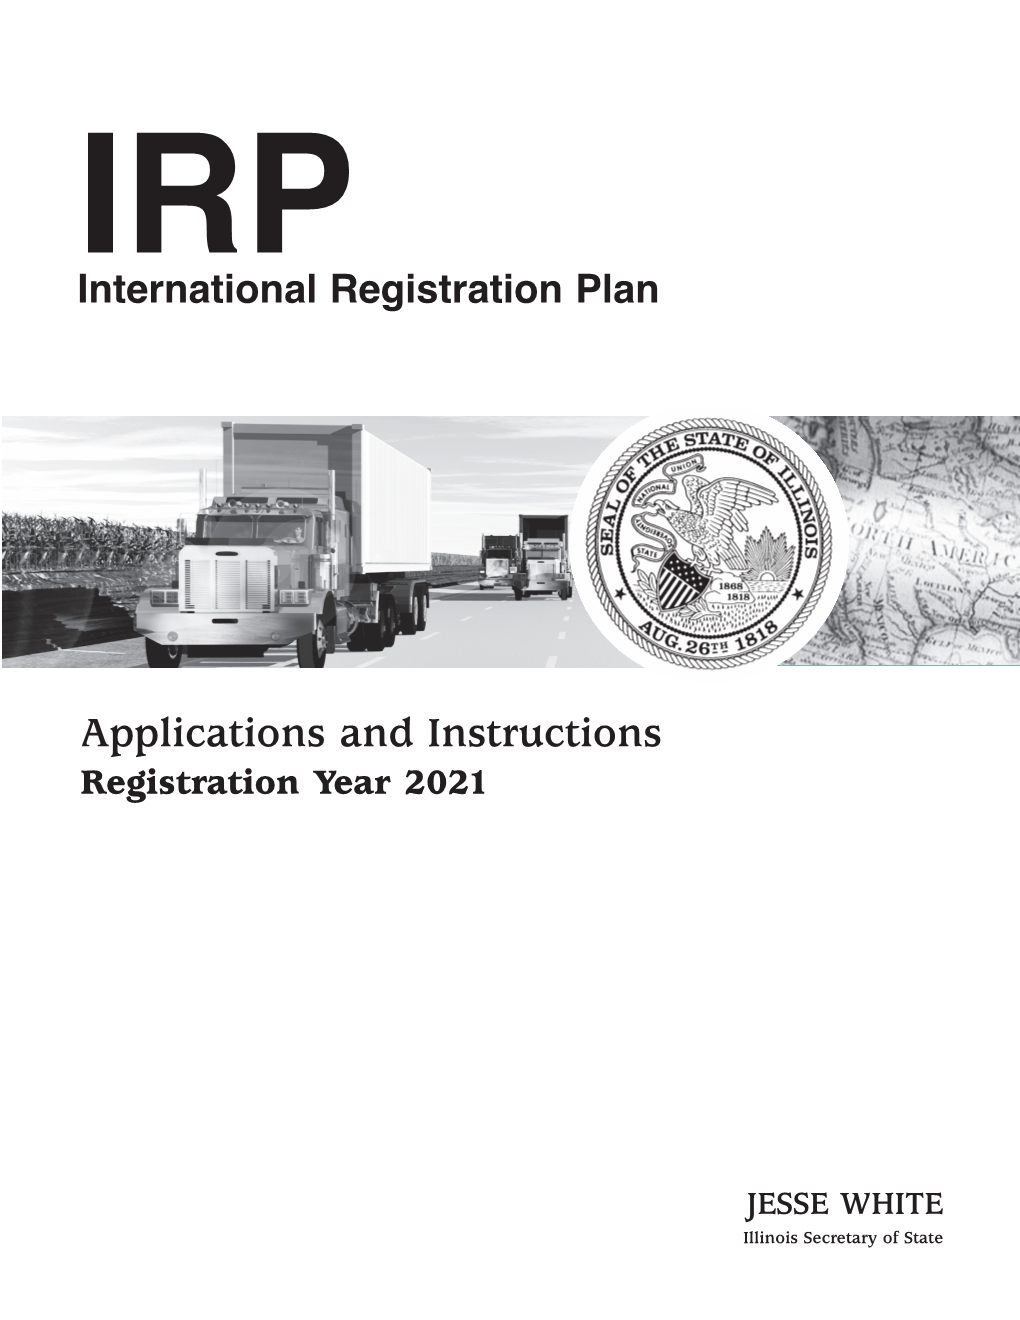 Illinois IRP Applications and Instructions Manual